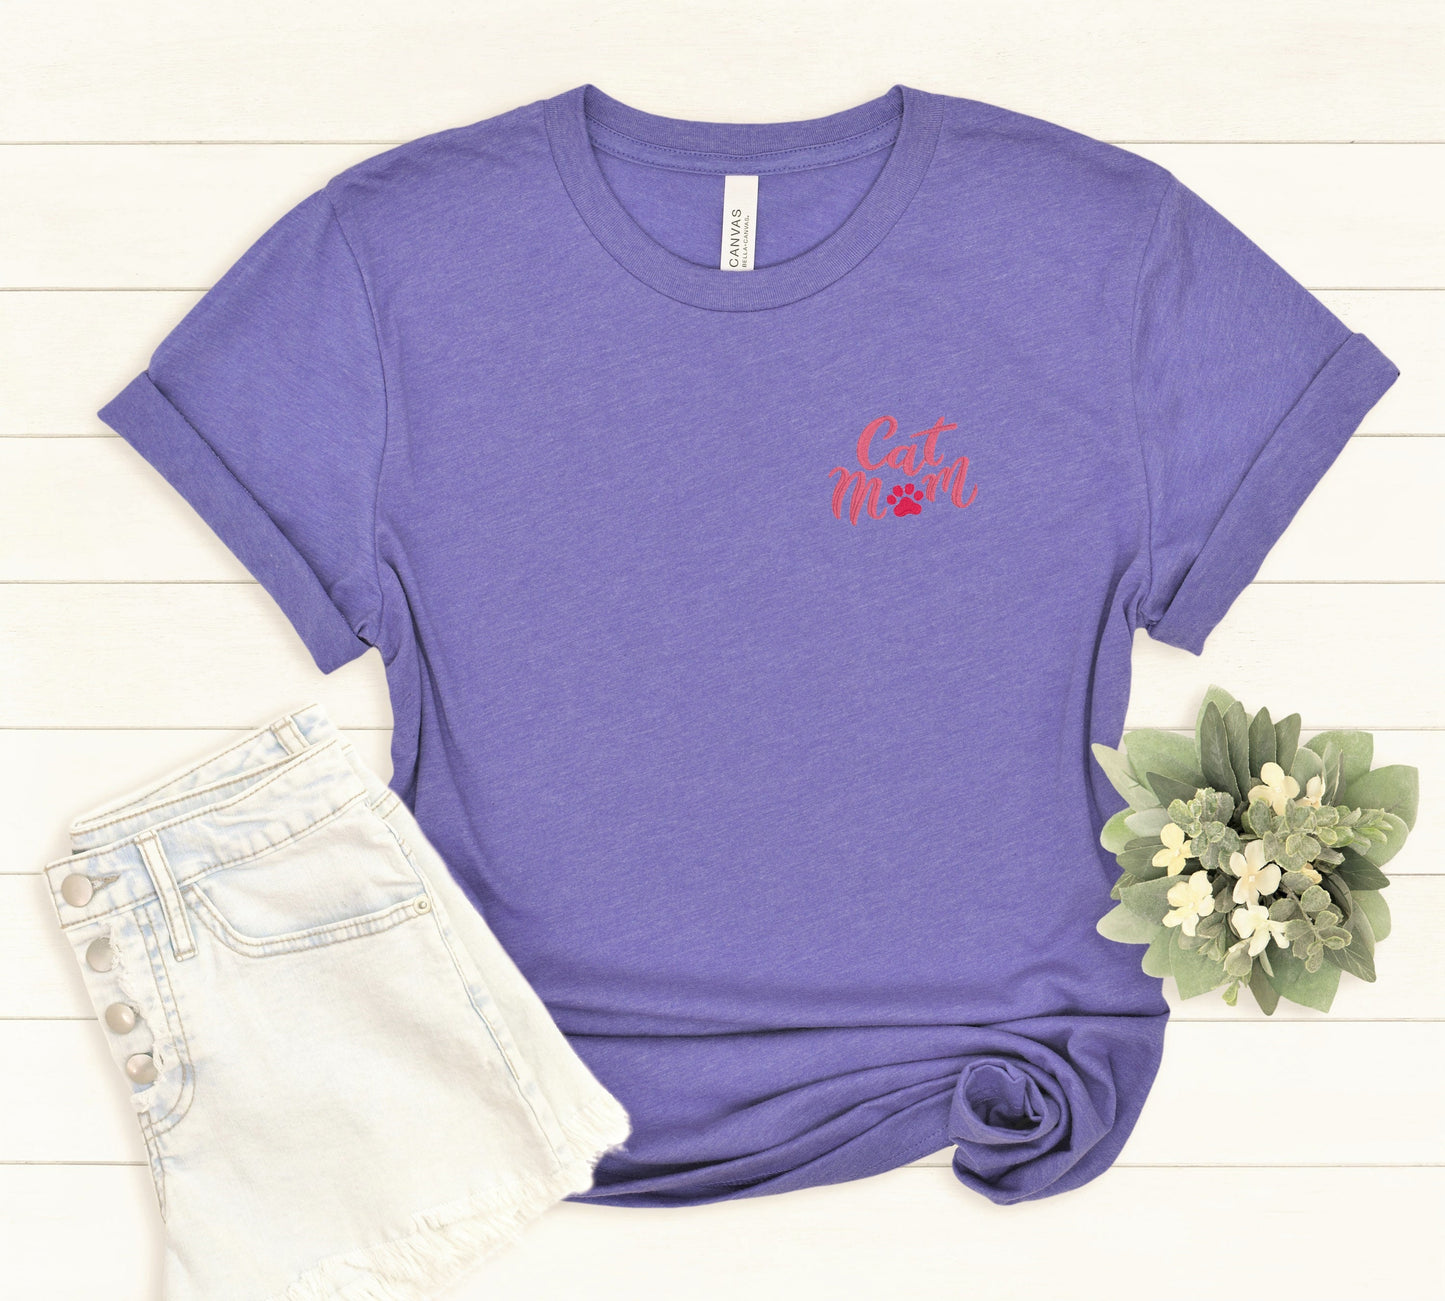 Cat Mom Embroidered Tee